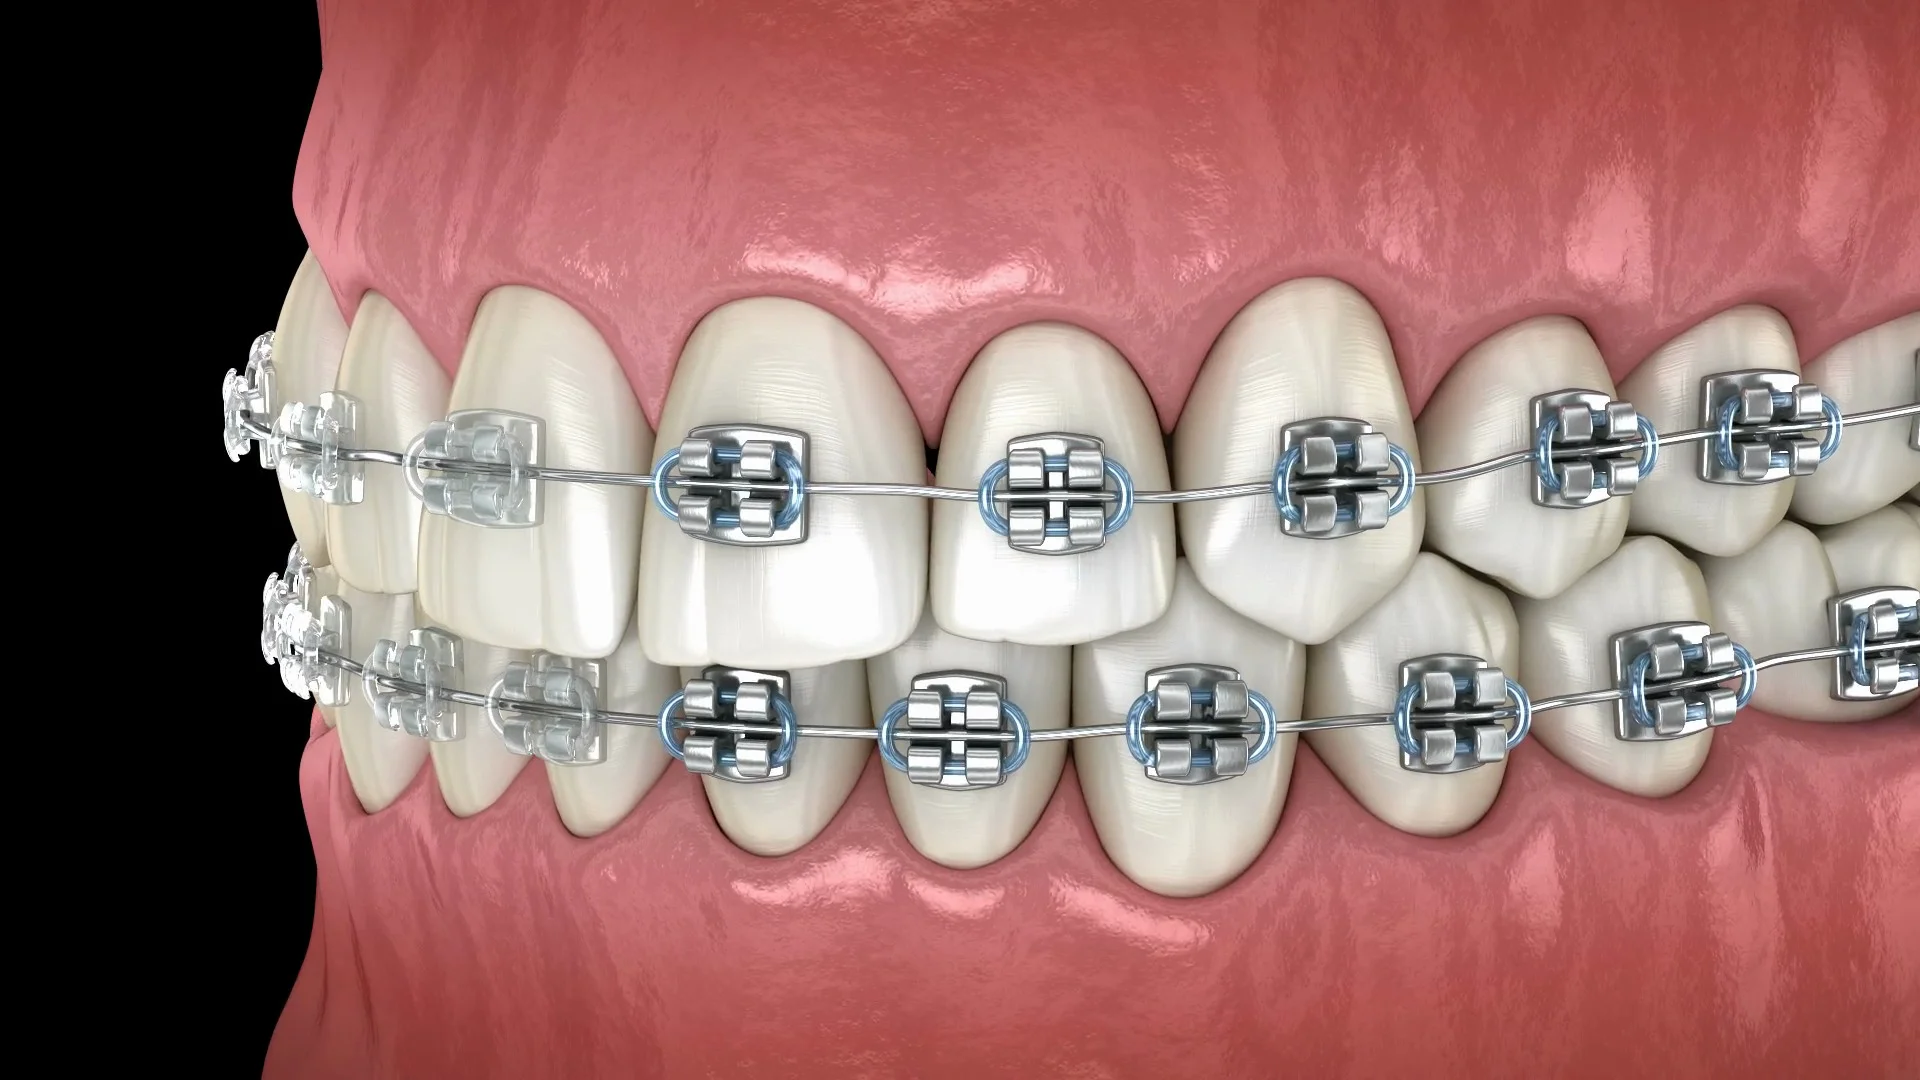 Invisible Braces - A Discreet Way to Get Orthodontic Treatment